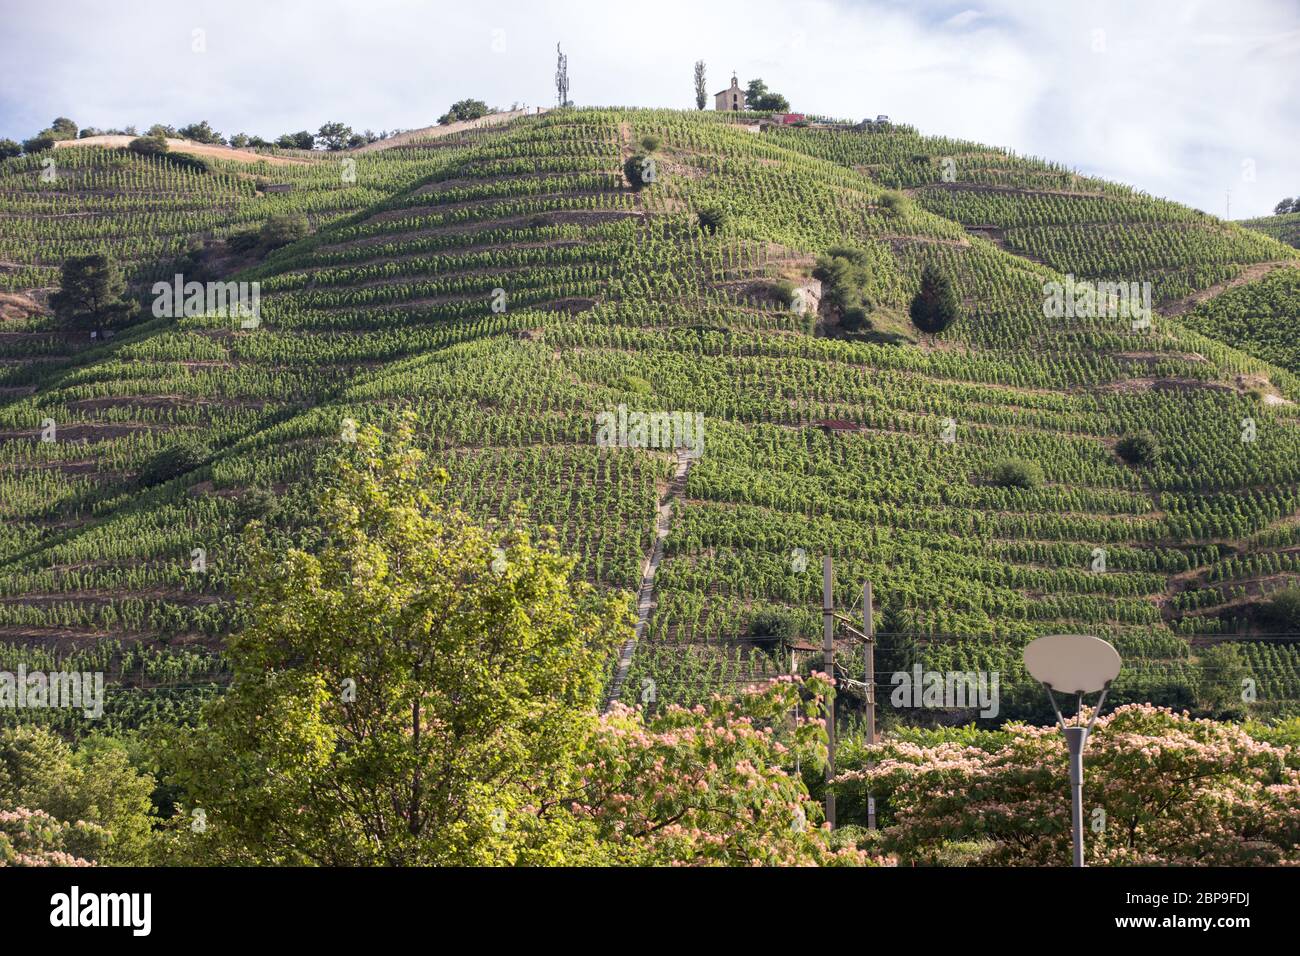 View of the M. Chapoutier Crozes-Hermitage vineyards in Tain l'Hermitage, Rhone valley, France Stock Photo